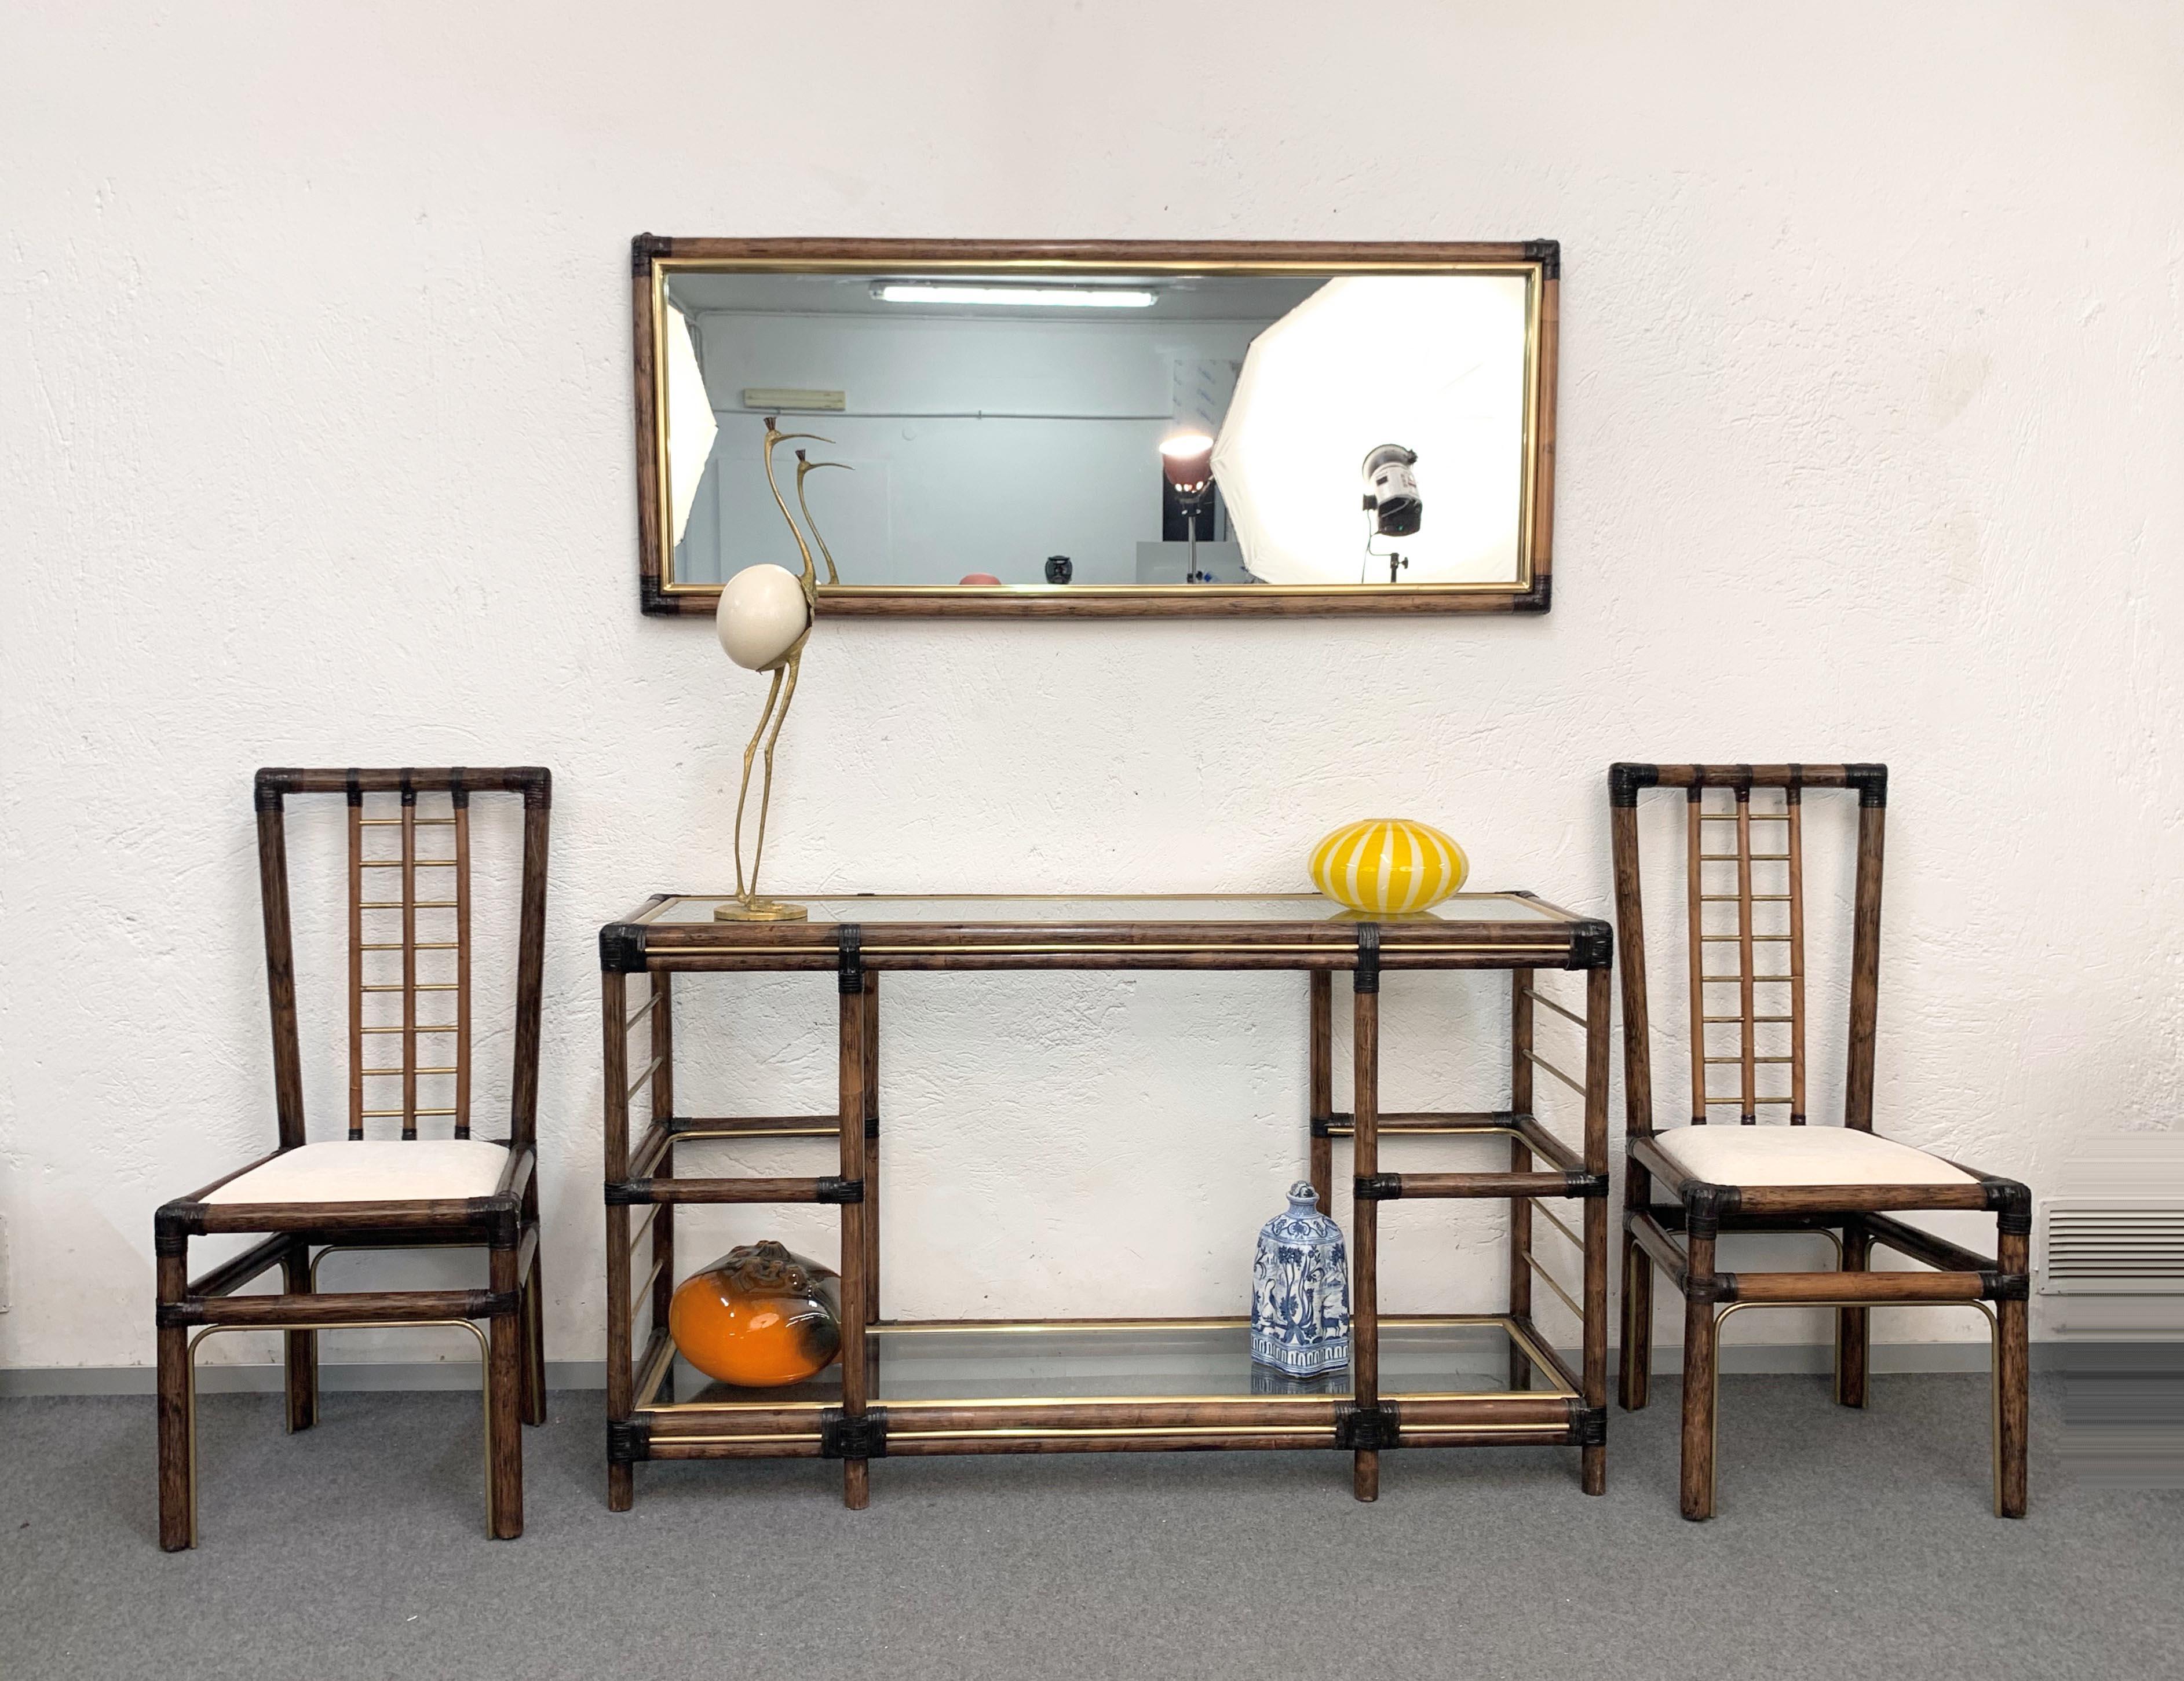 Midcentury Bamboo and Brass Console Table, Wall Mirror and Chairs, Italy, 1980s (Moderne der Mitte des Jahrhunderts)